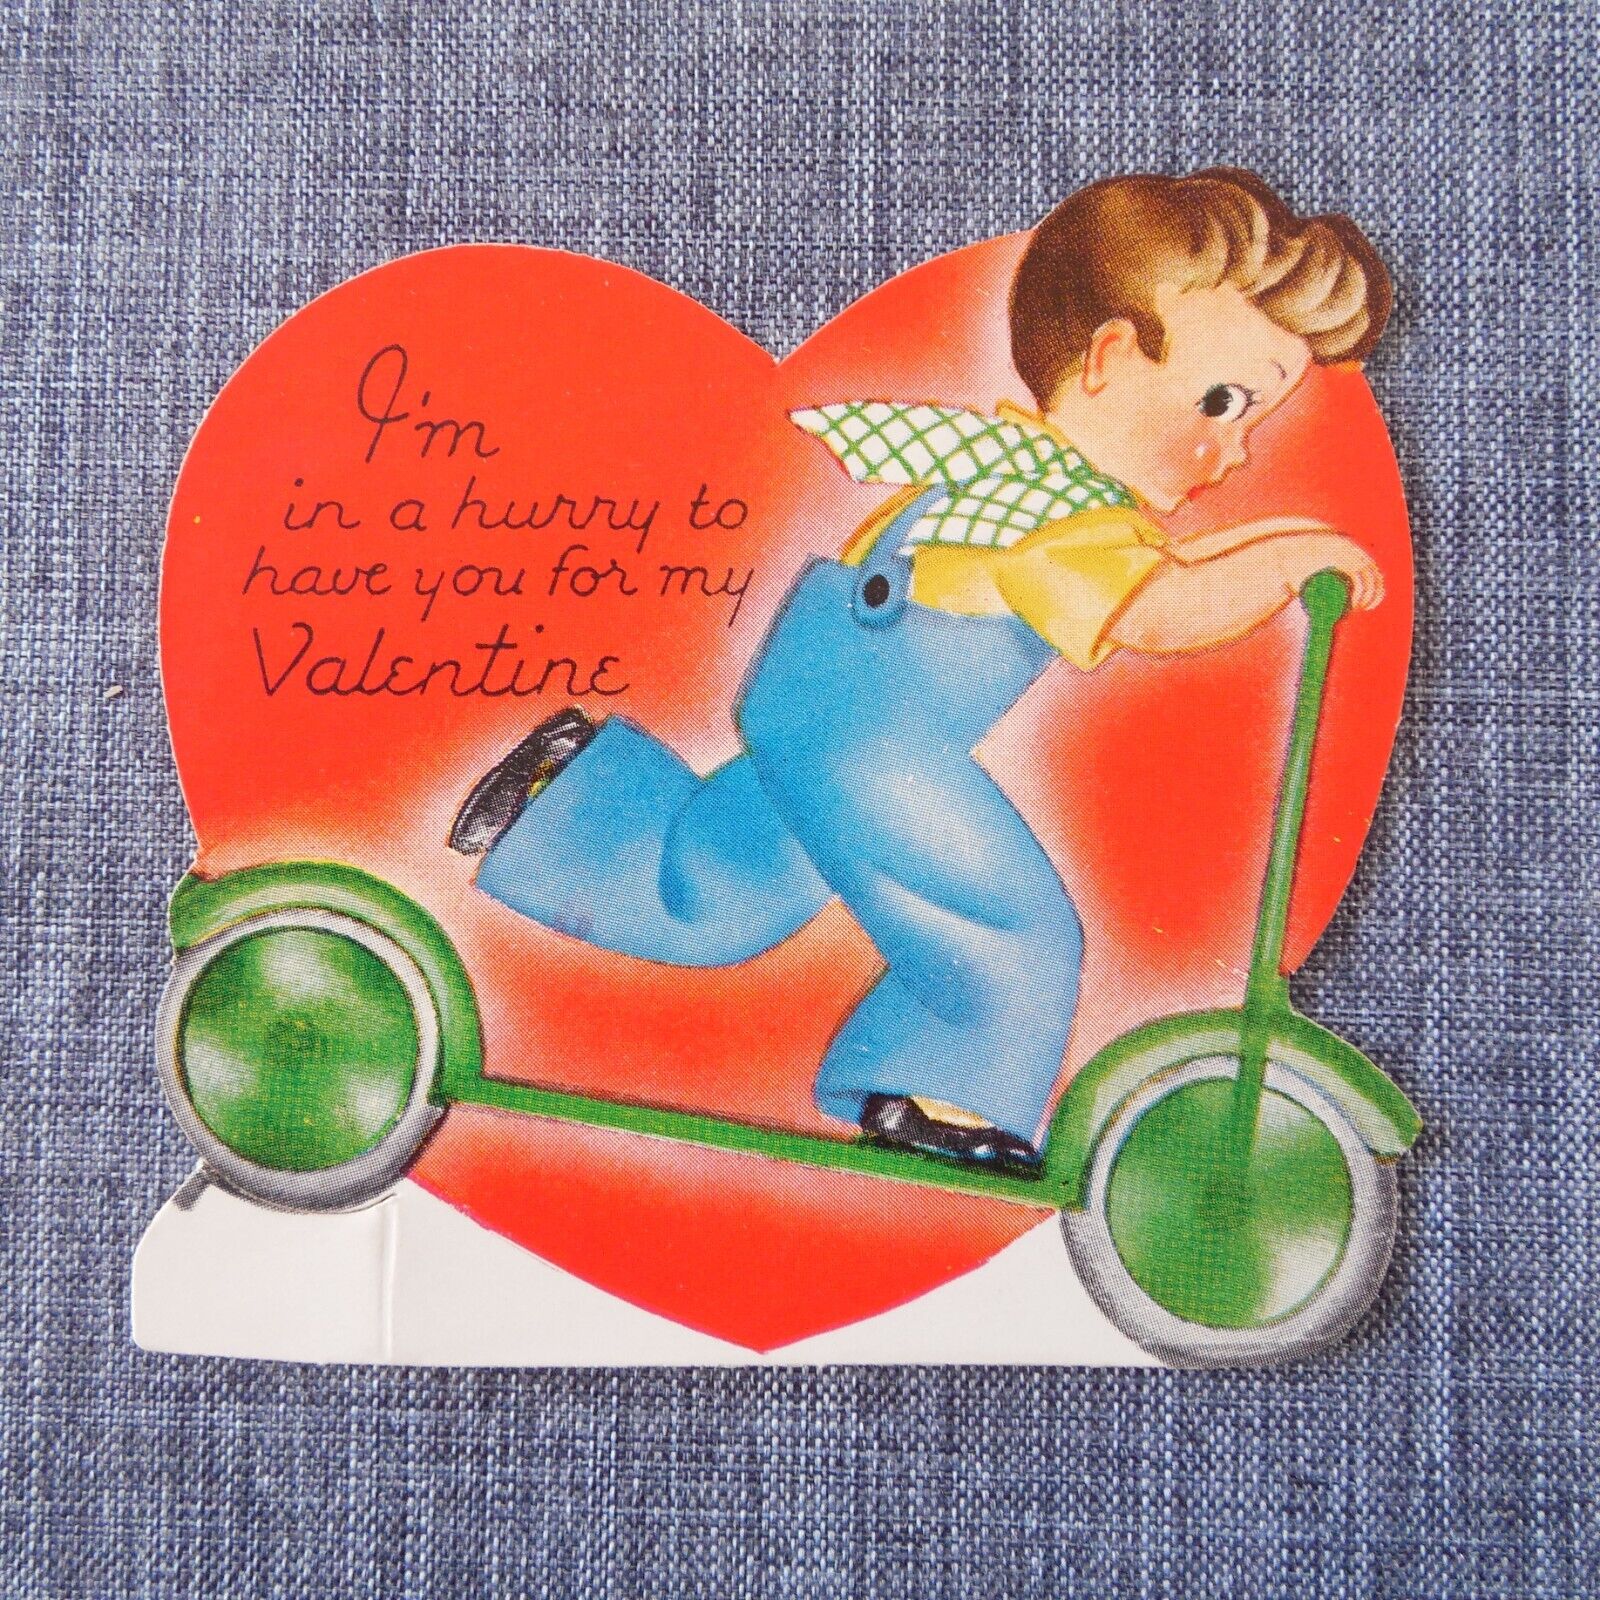 Early 1900s Vintage Valentine Card Boy On Scooter Die Cut A-meri-card Heart Used